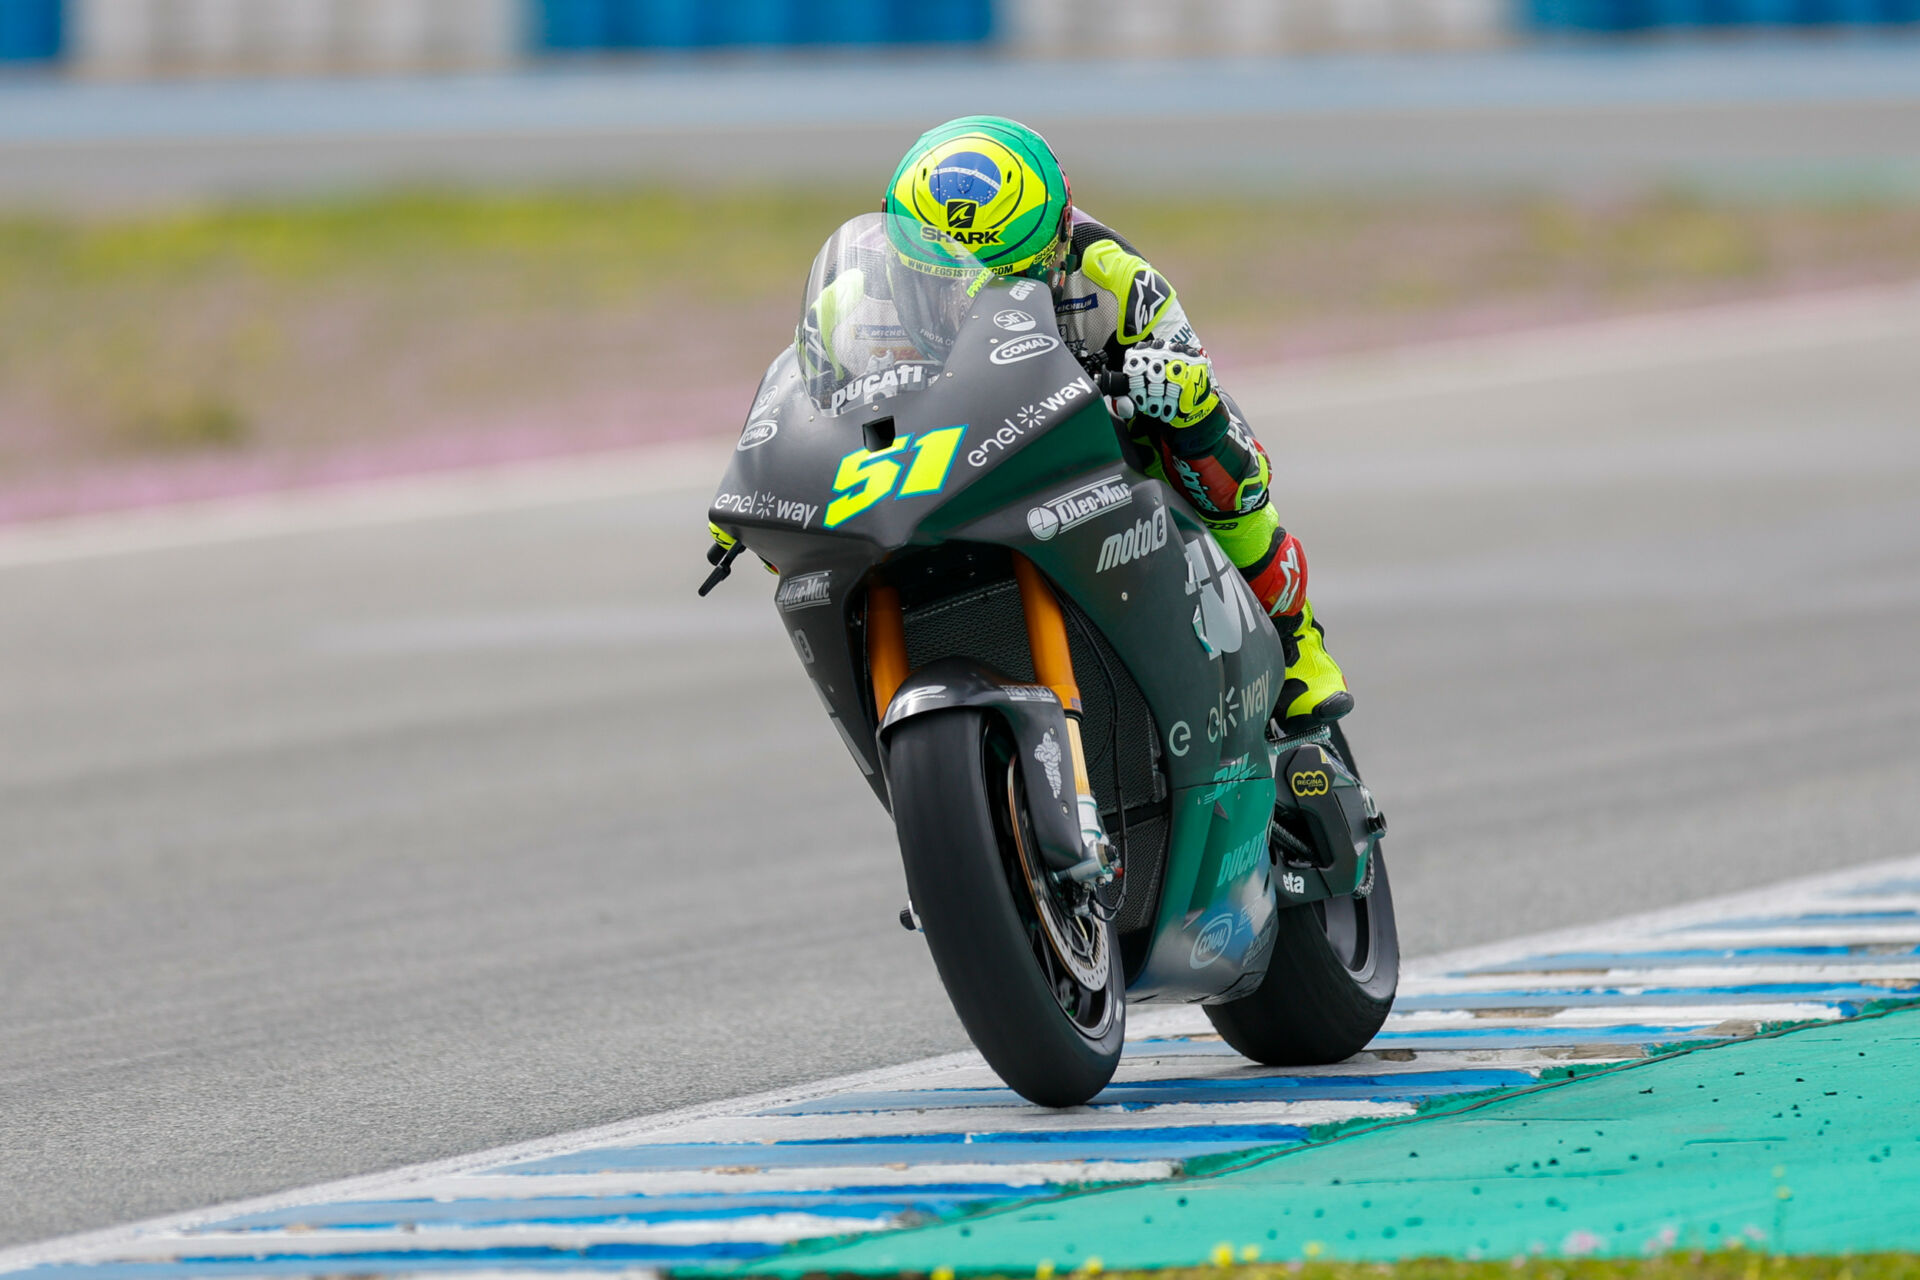 Eric Granado (51) was quickest during a weather-affected three-day MotoE pre-season test at Jerez. Photo courtesy Dorna.